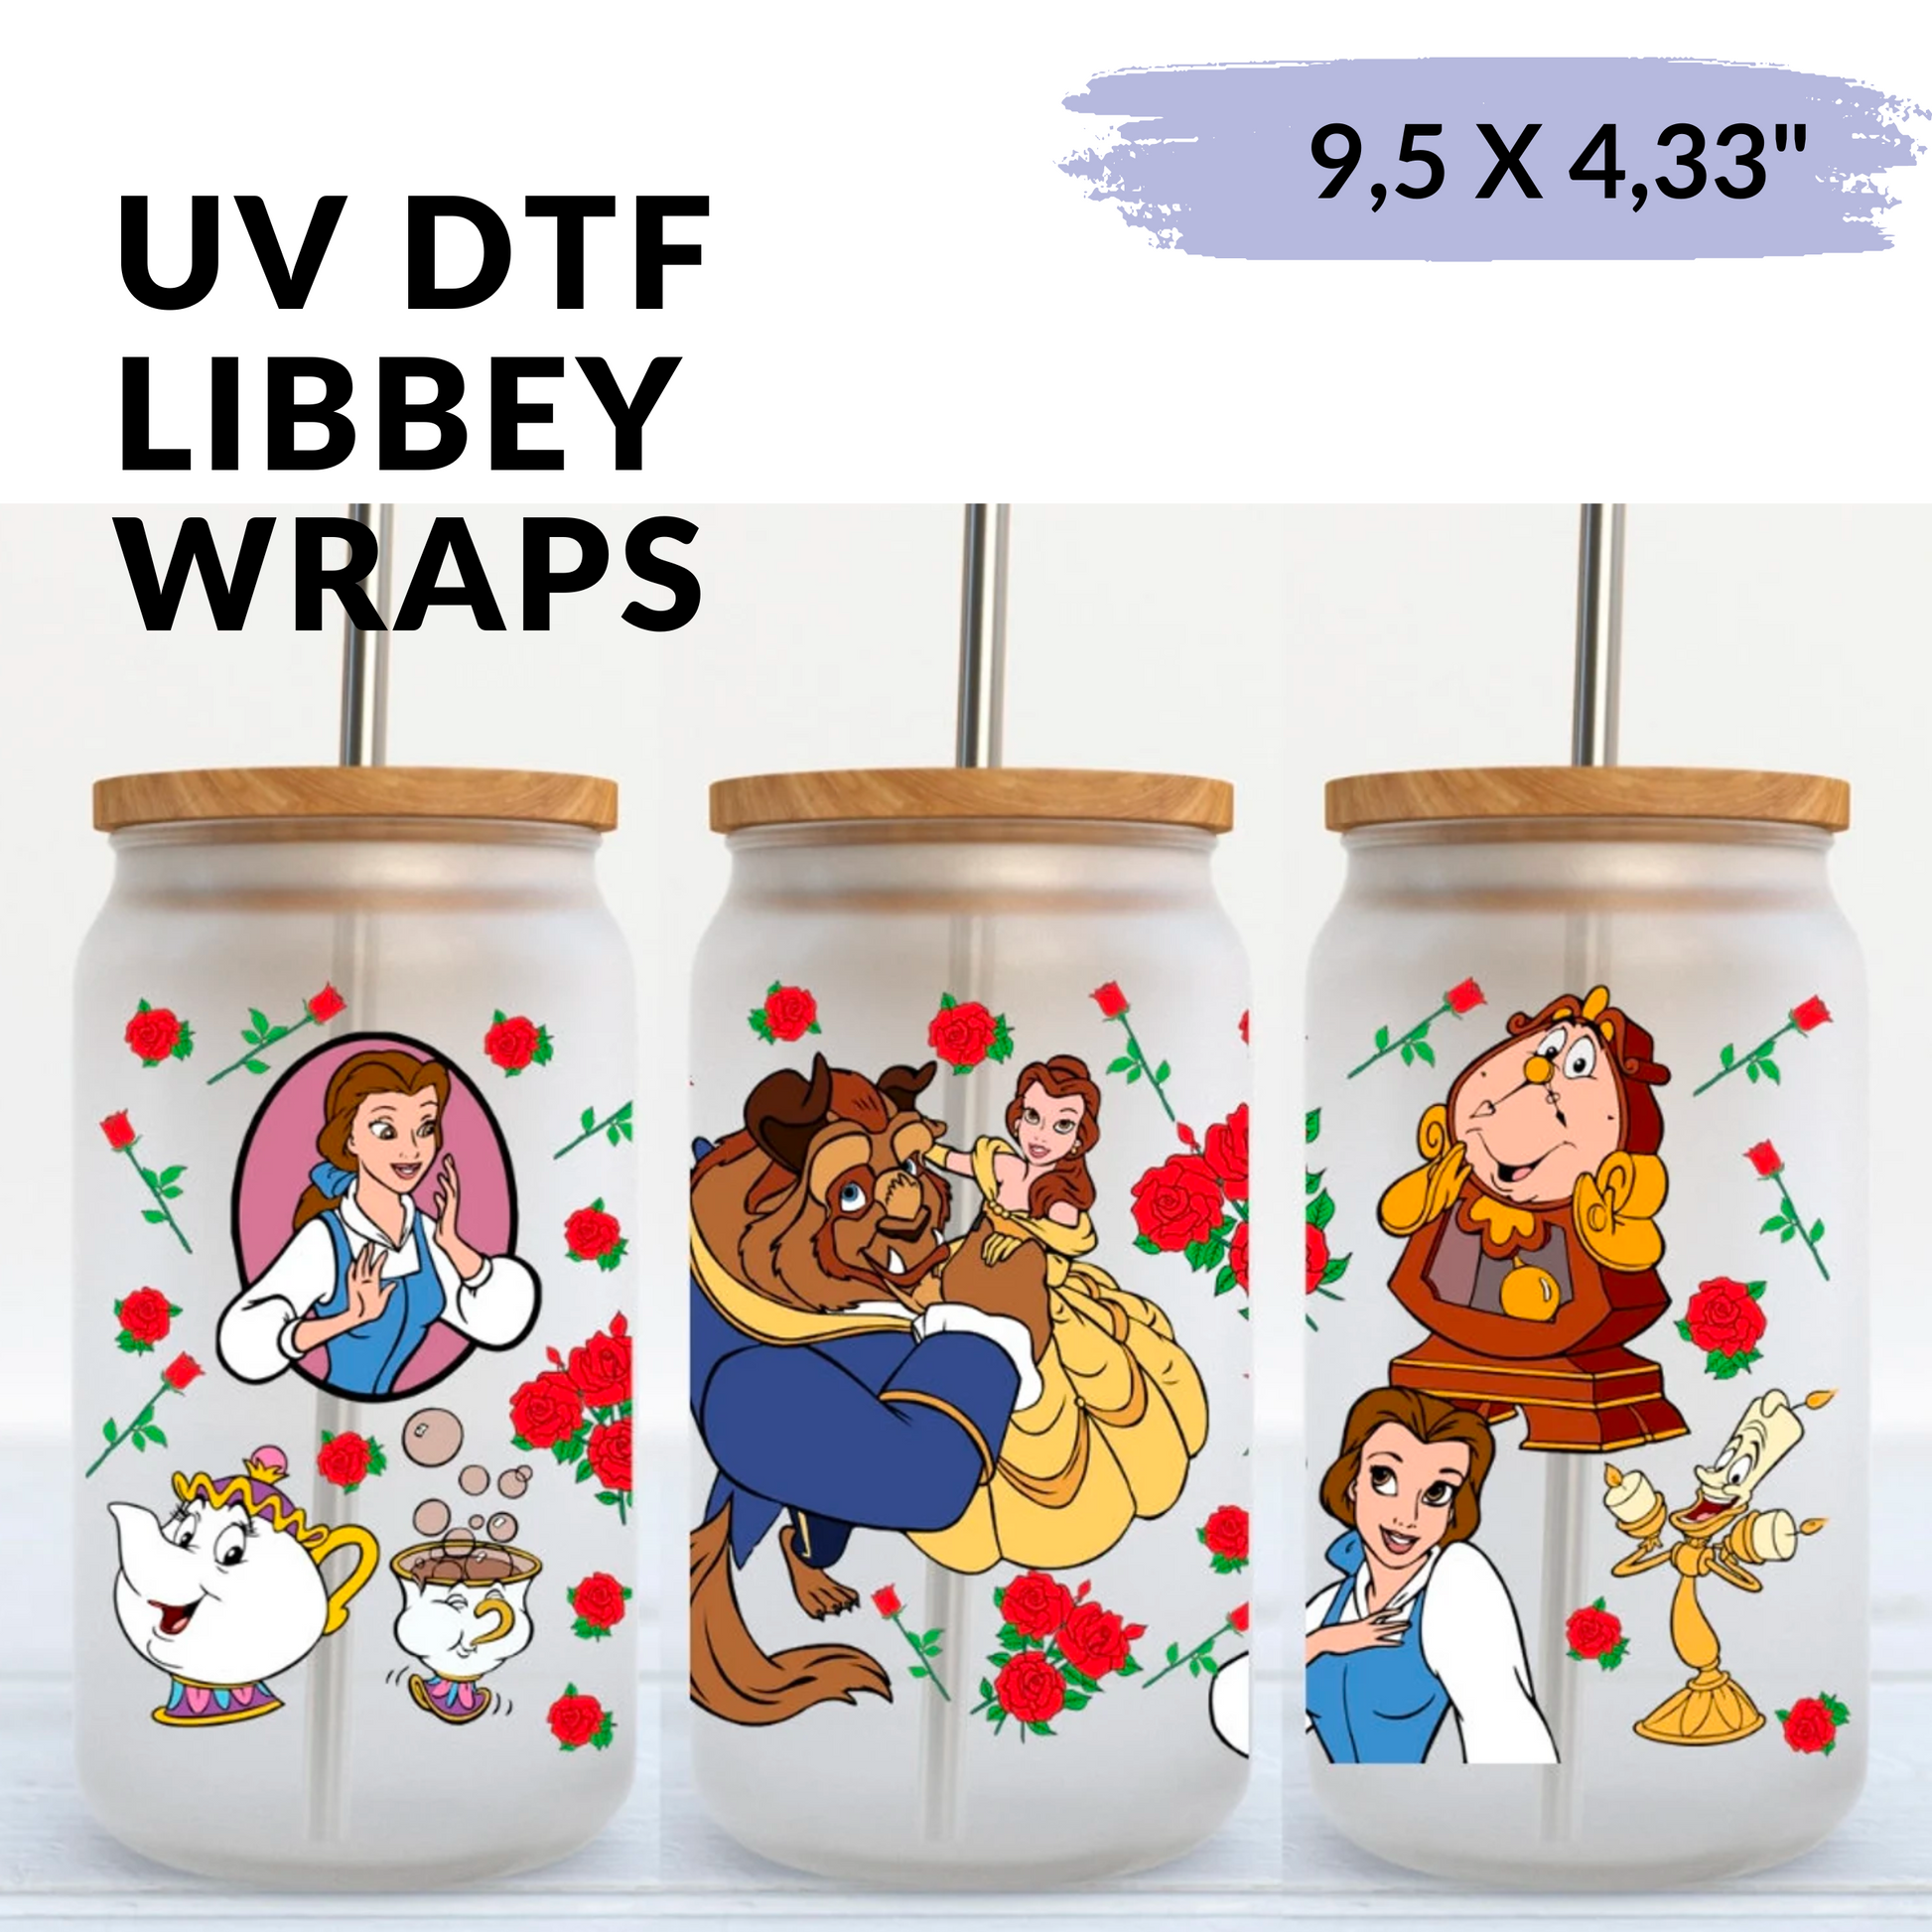 How to use uv dtf wrap on tumbler? 